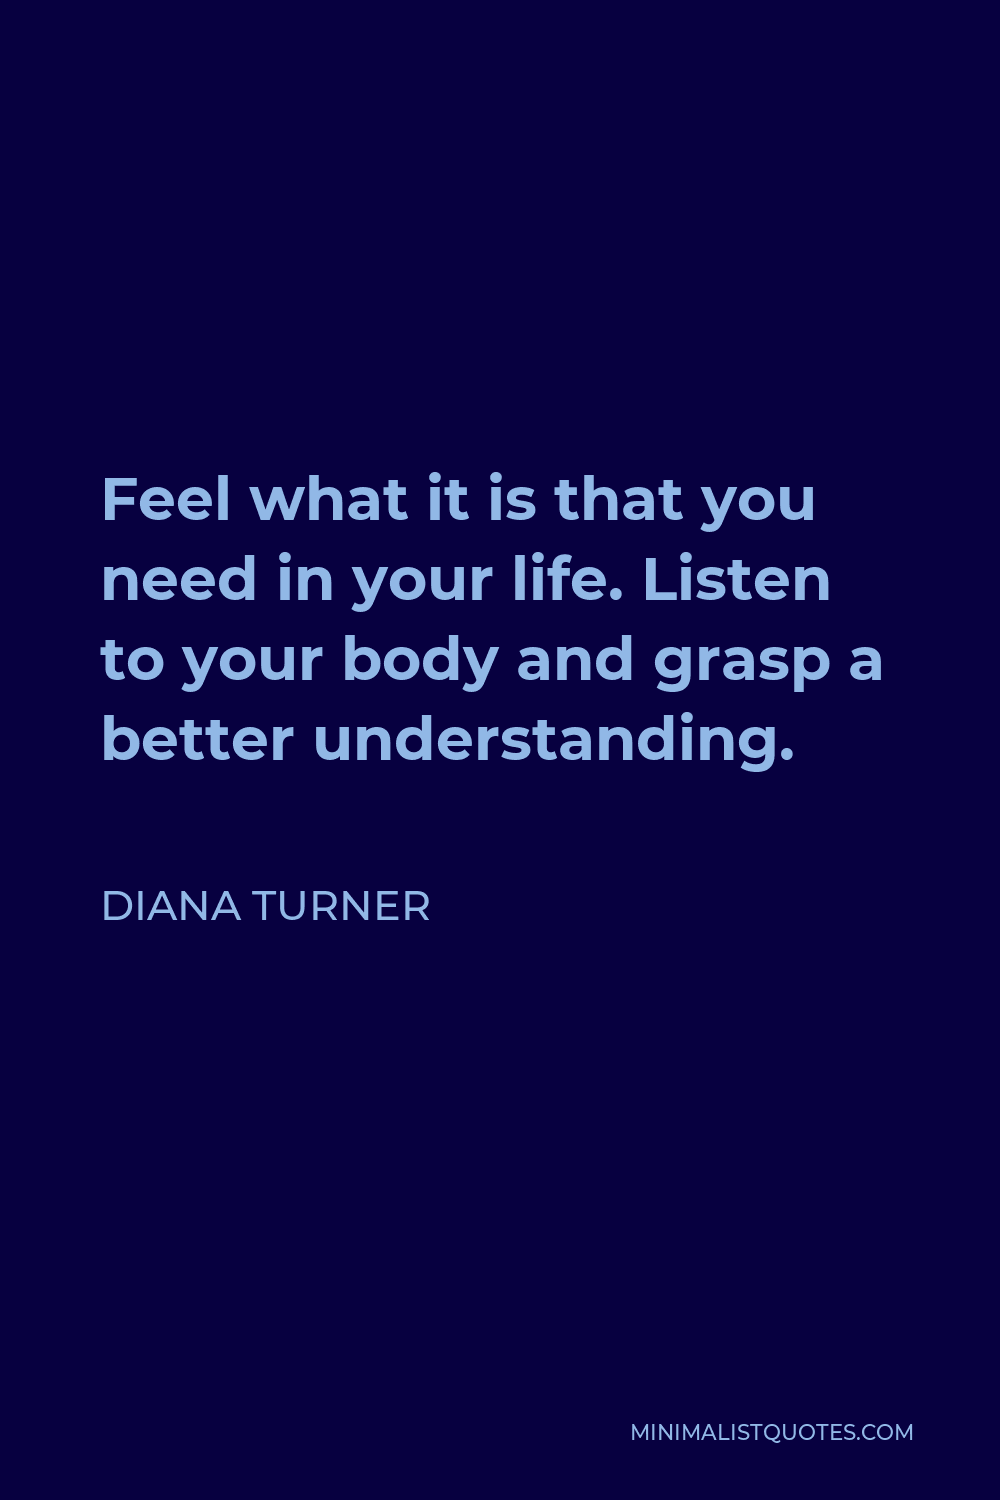 Diana Turner Quote - Feel what it is that you need in your life. Listen to your body and grasp a better understanding.